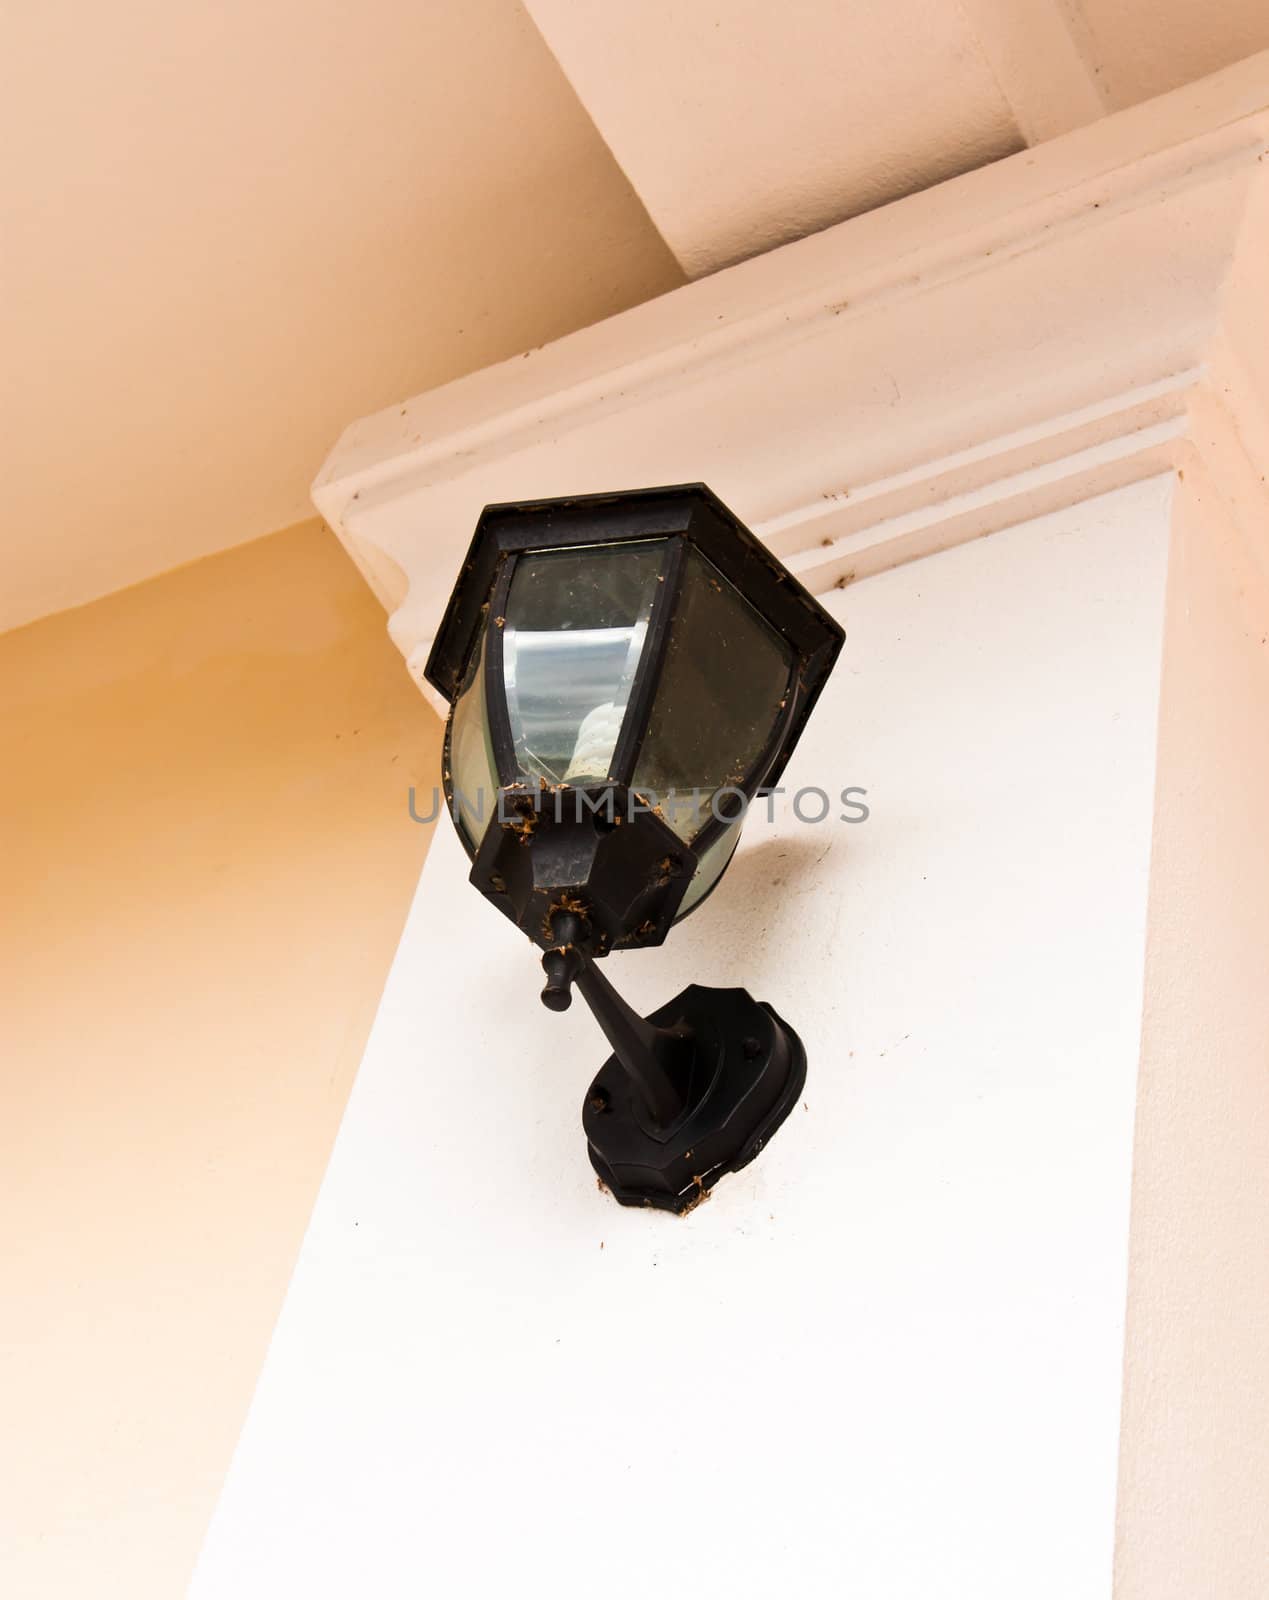 Wall lamp to light the side of the house.